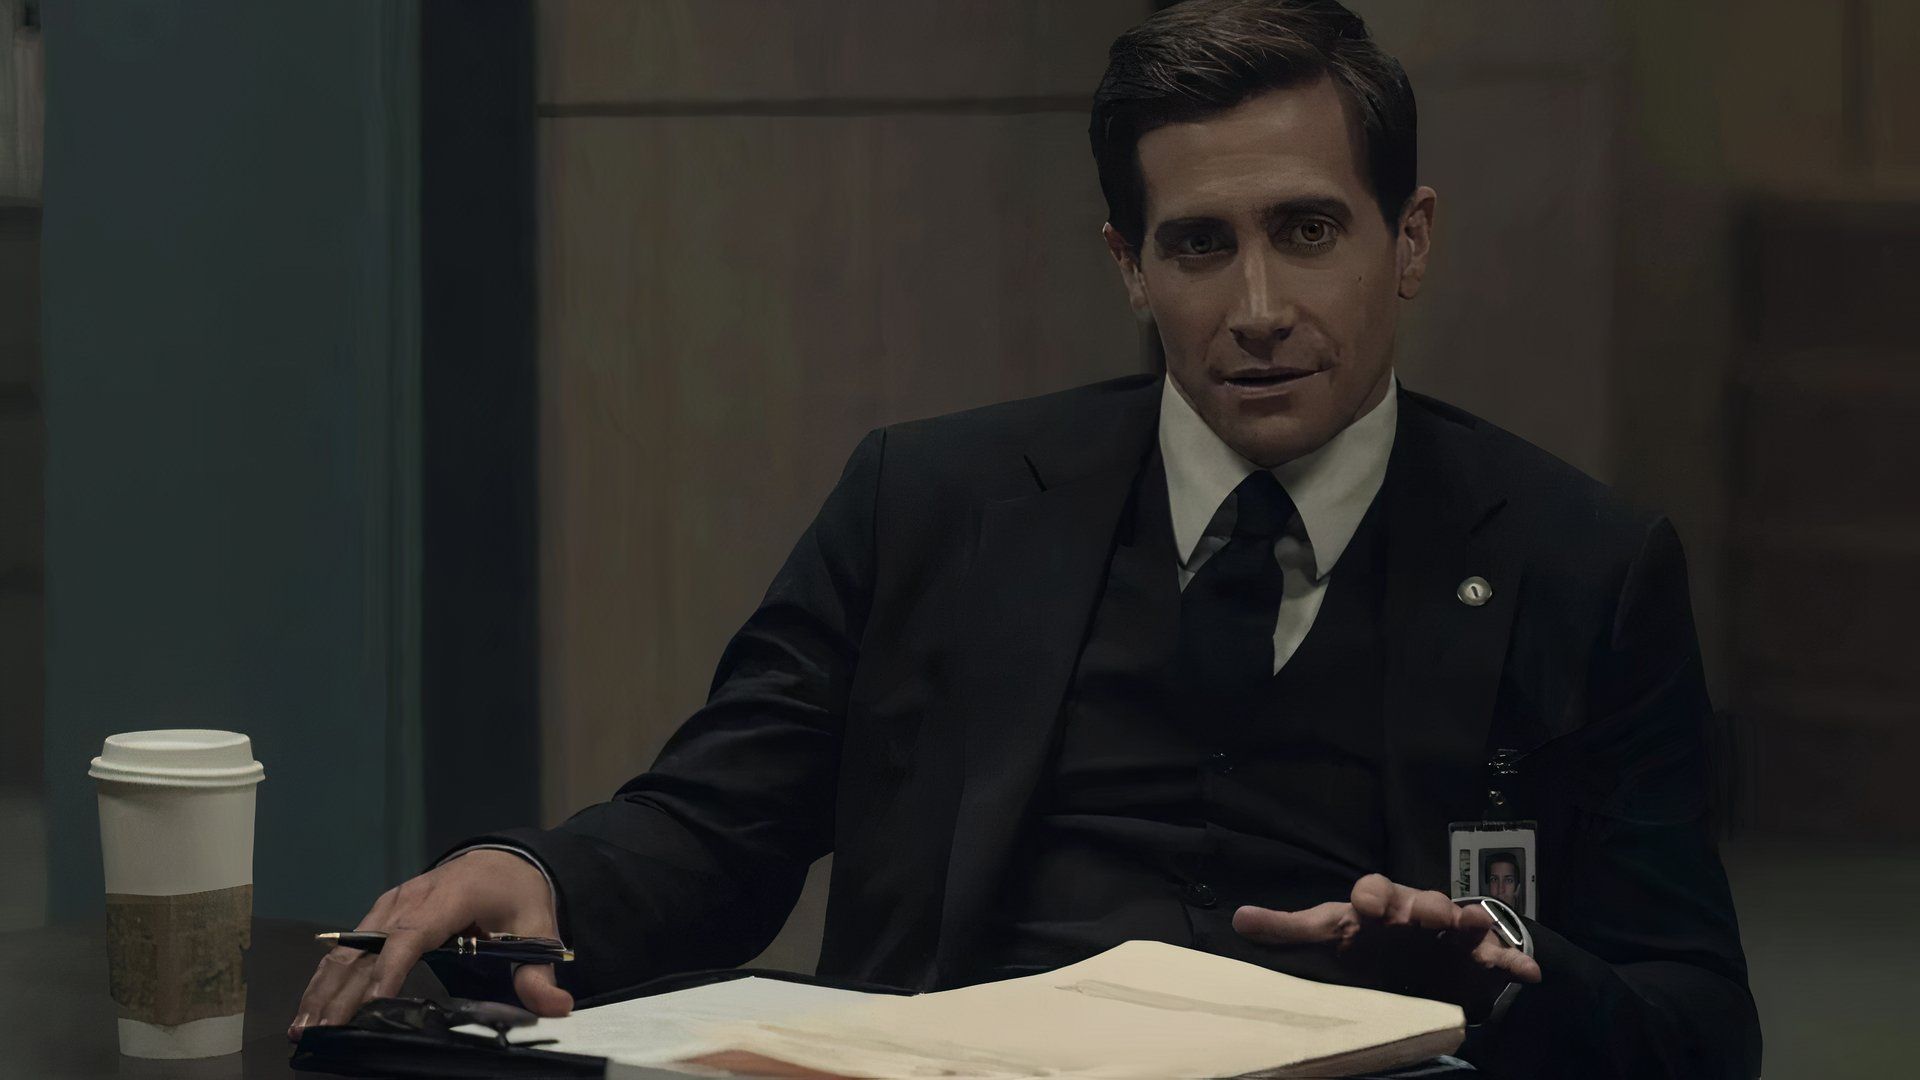 Jake Gyllenhaal is Leading a TV Miniseries for the First Time, and the Reviews are Encouraging